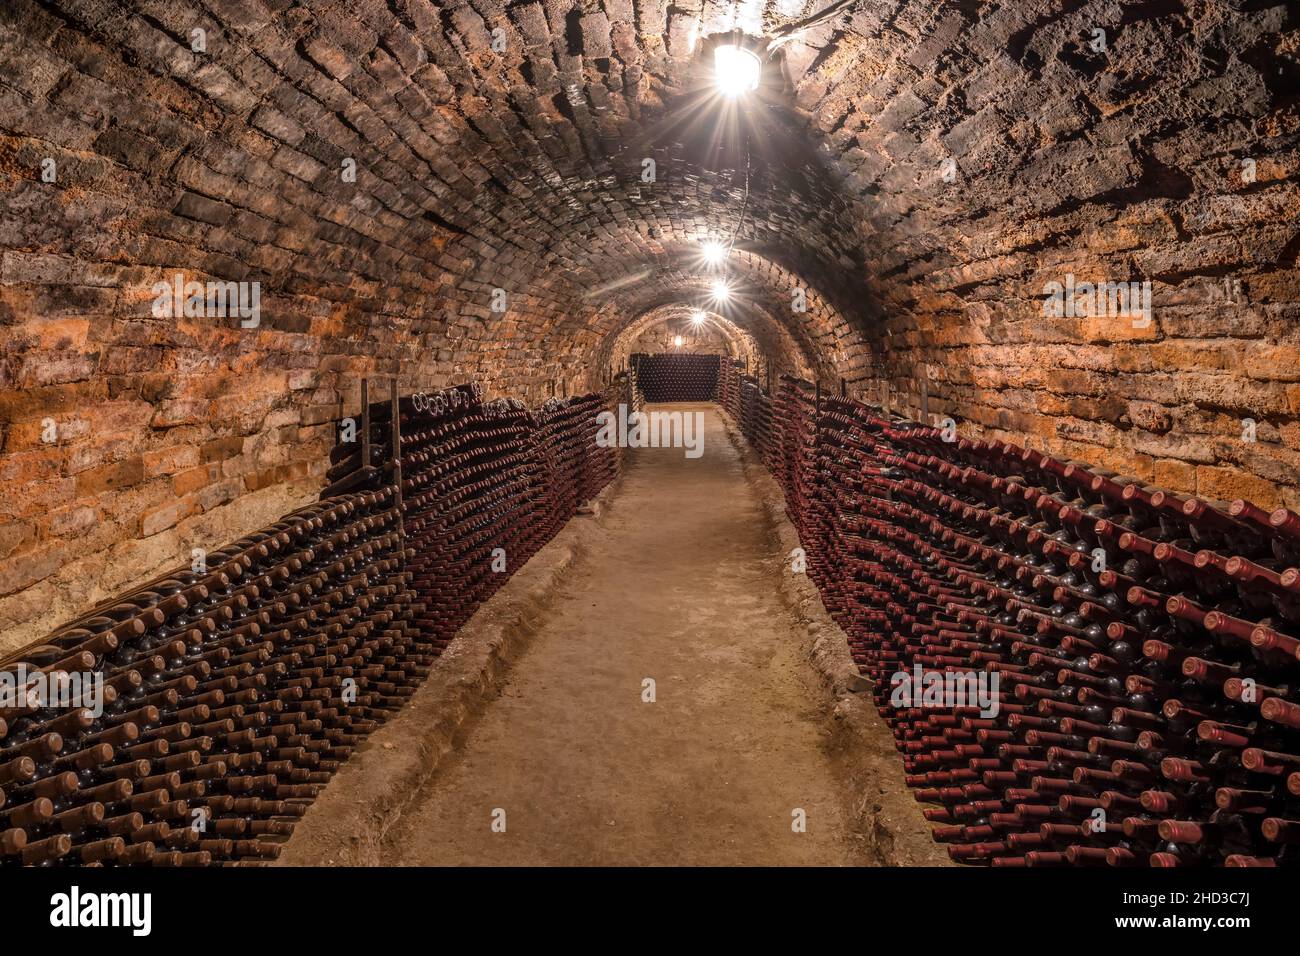 Old wine bottles in rows in the wine cellar Stock Photo